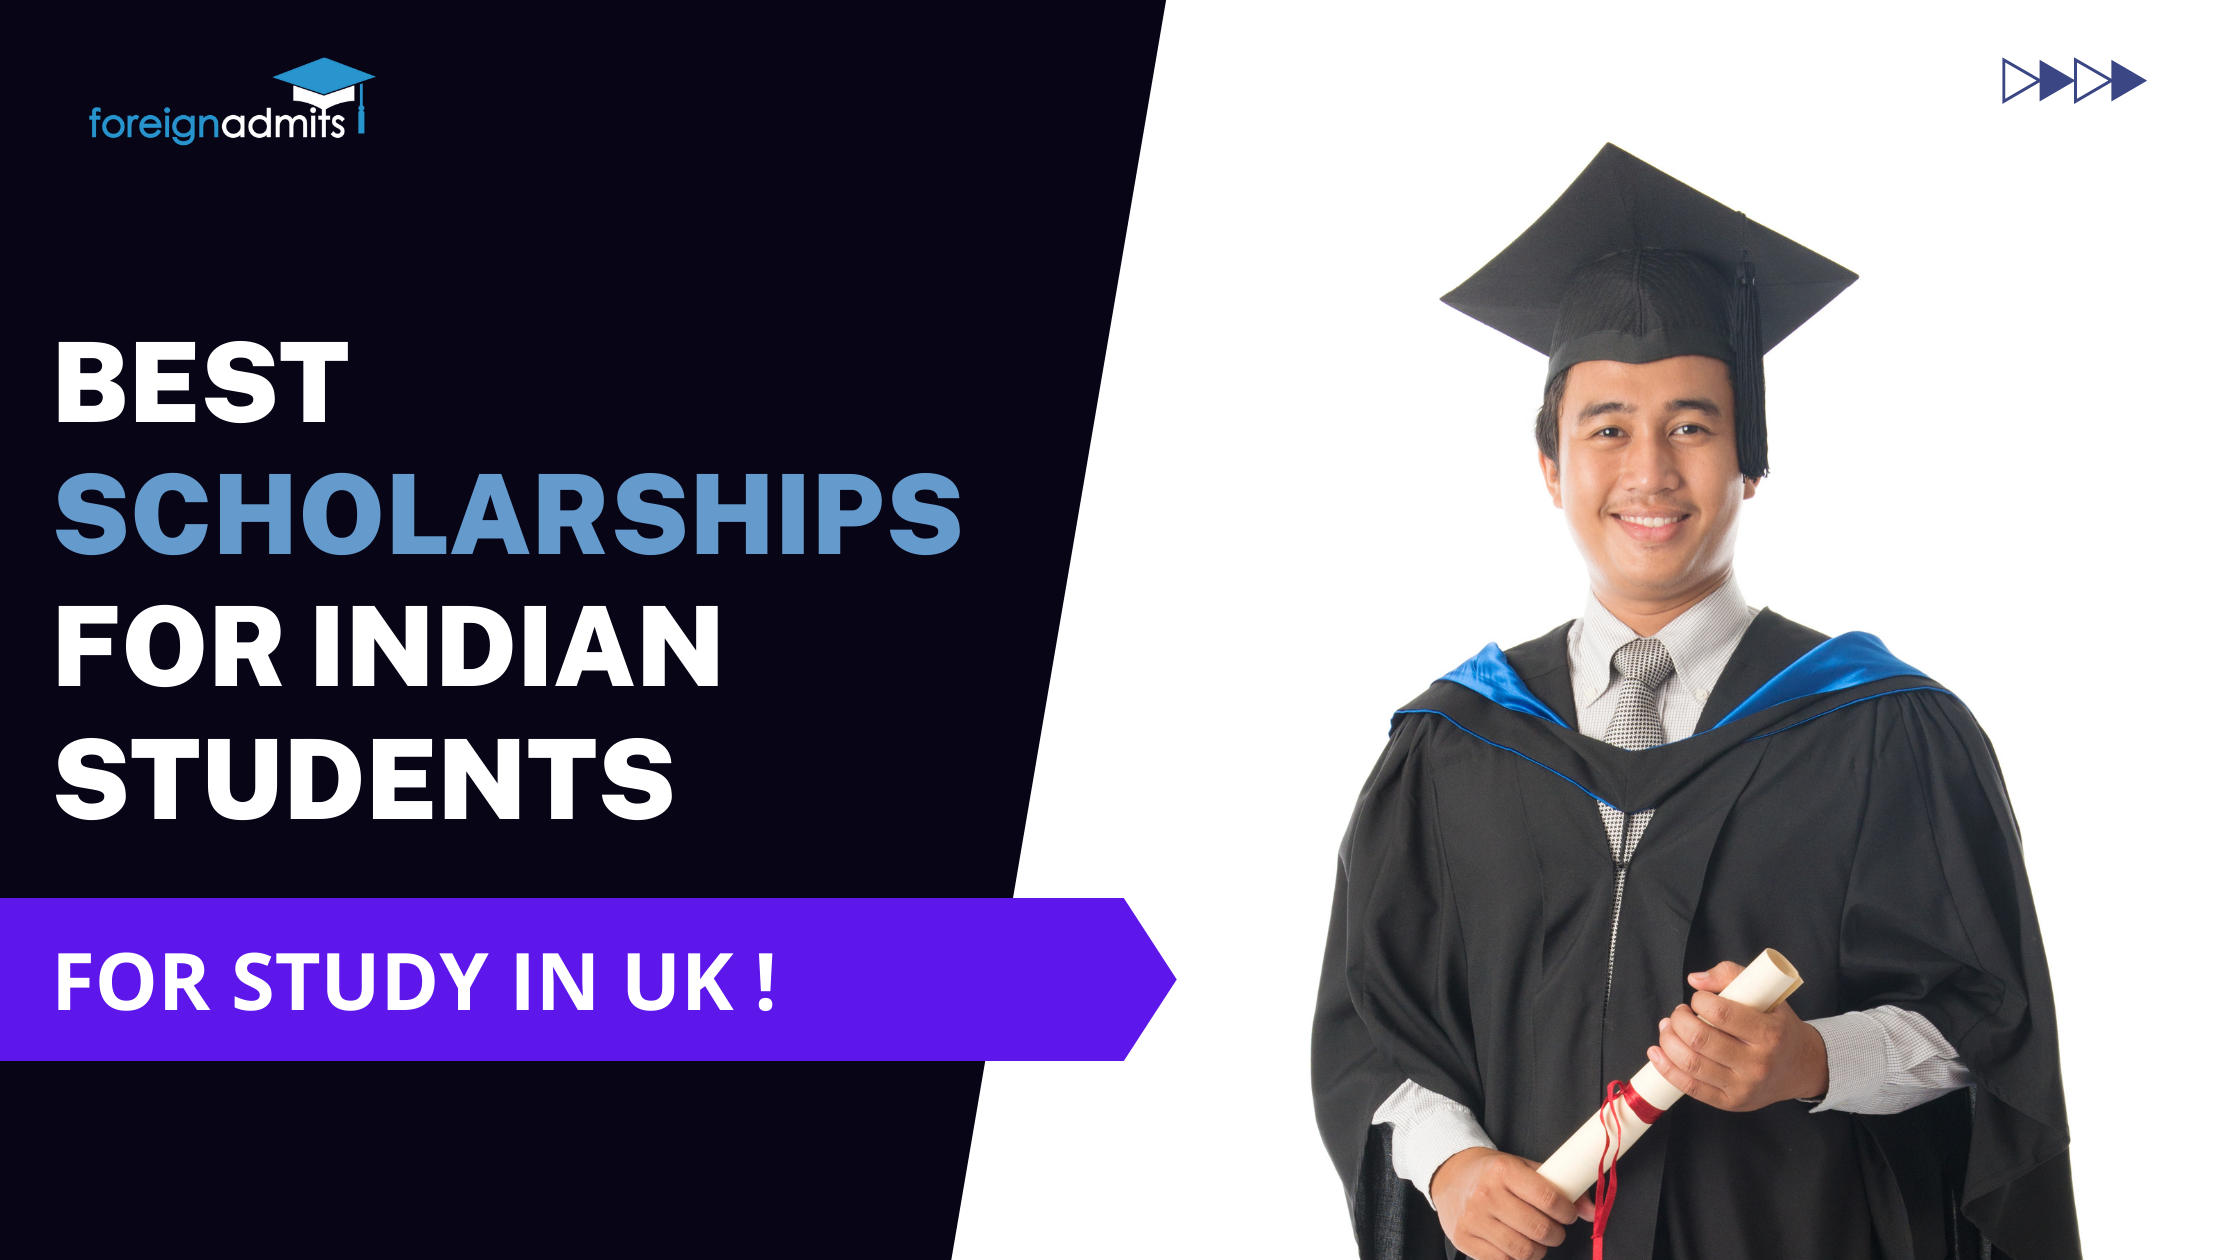 Best scholarships for indians students to study in UK